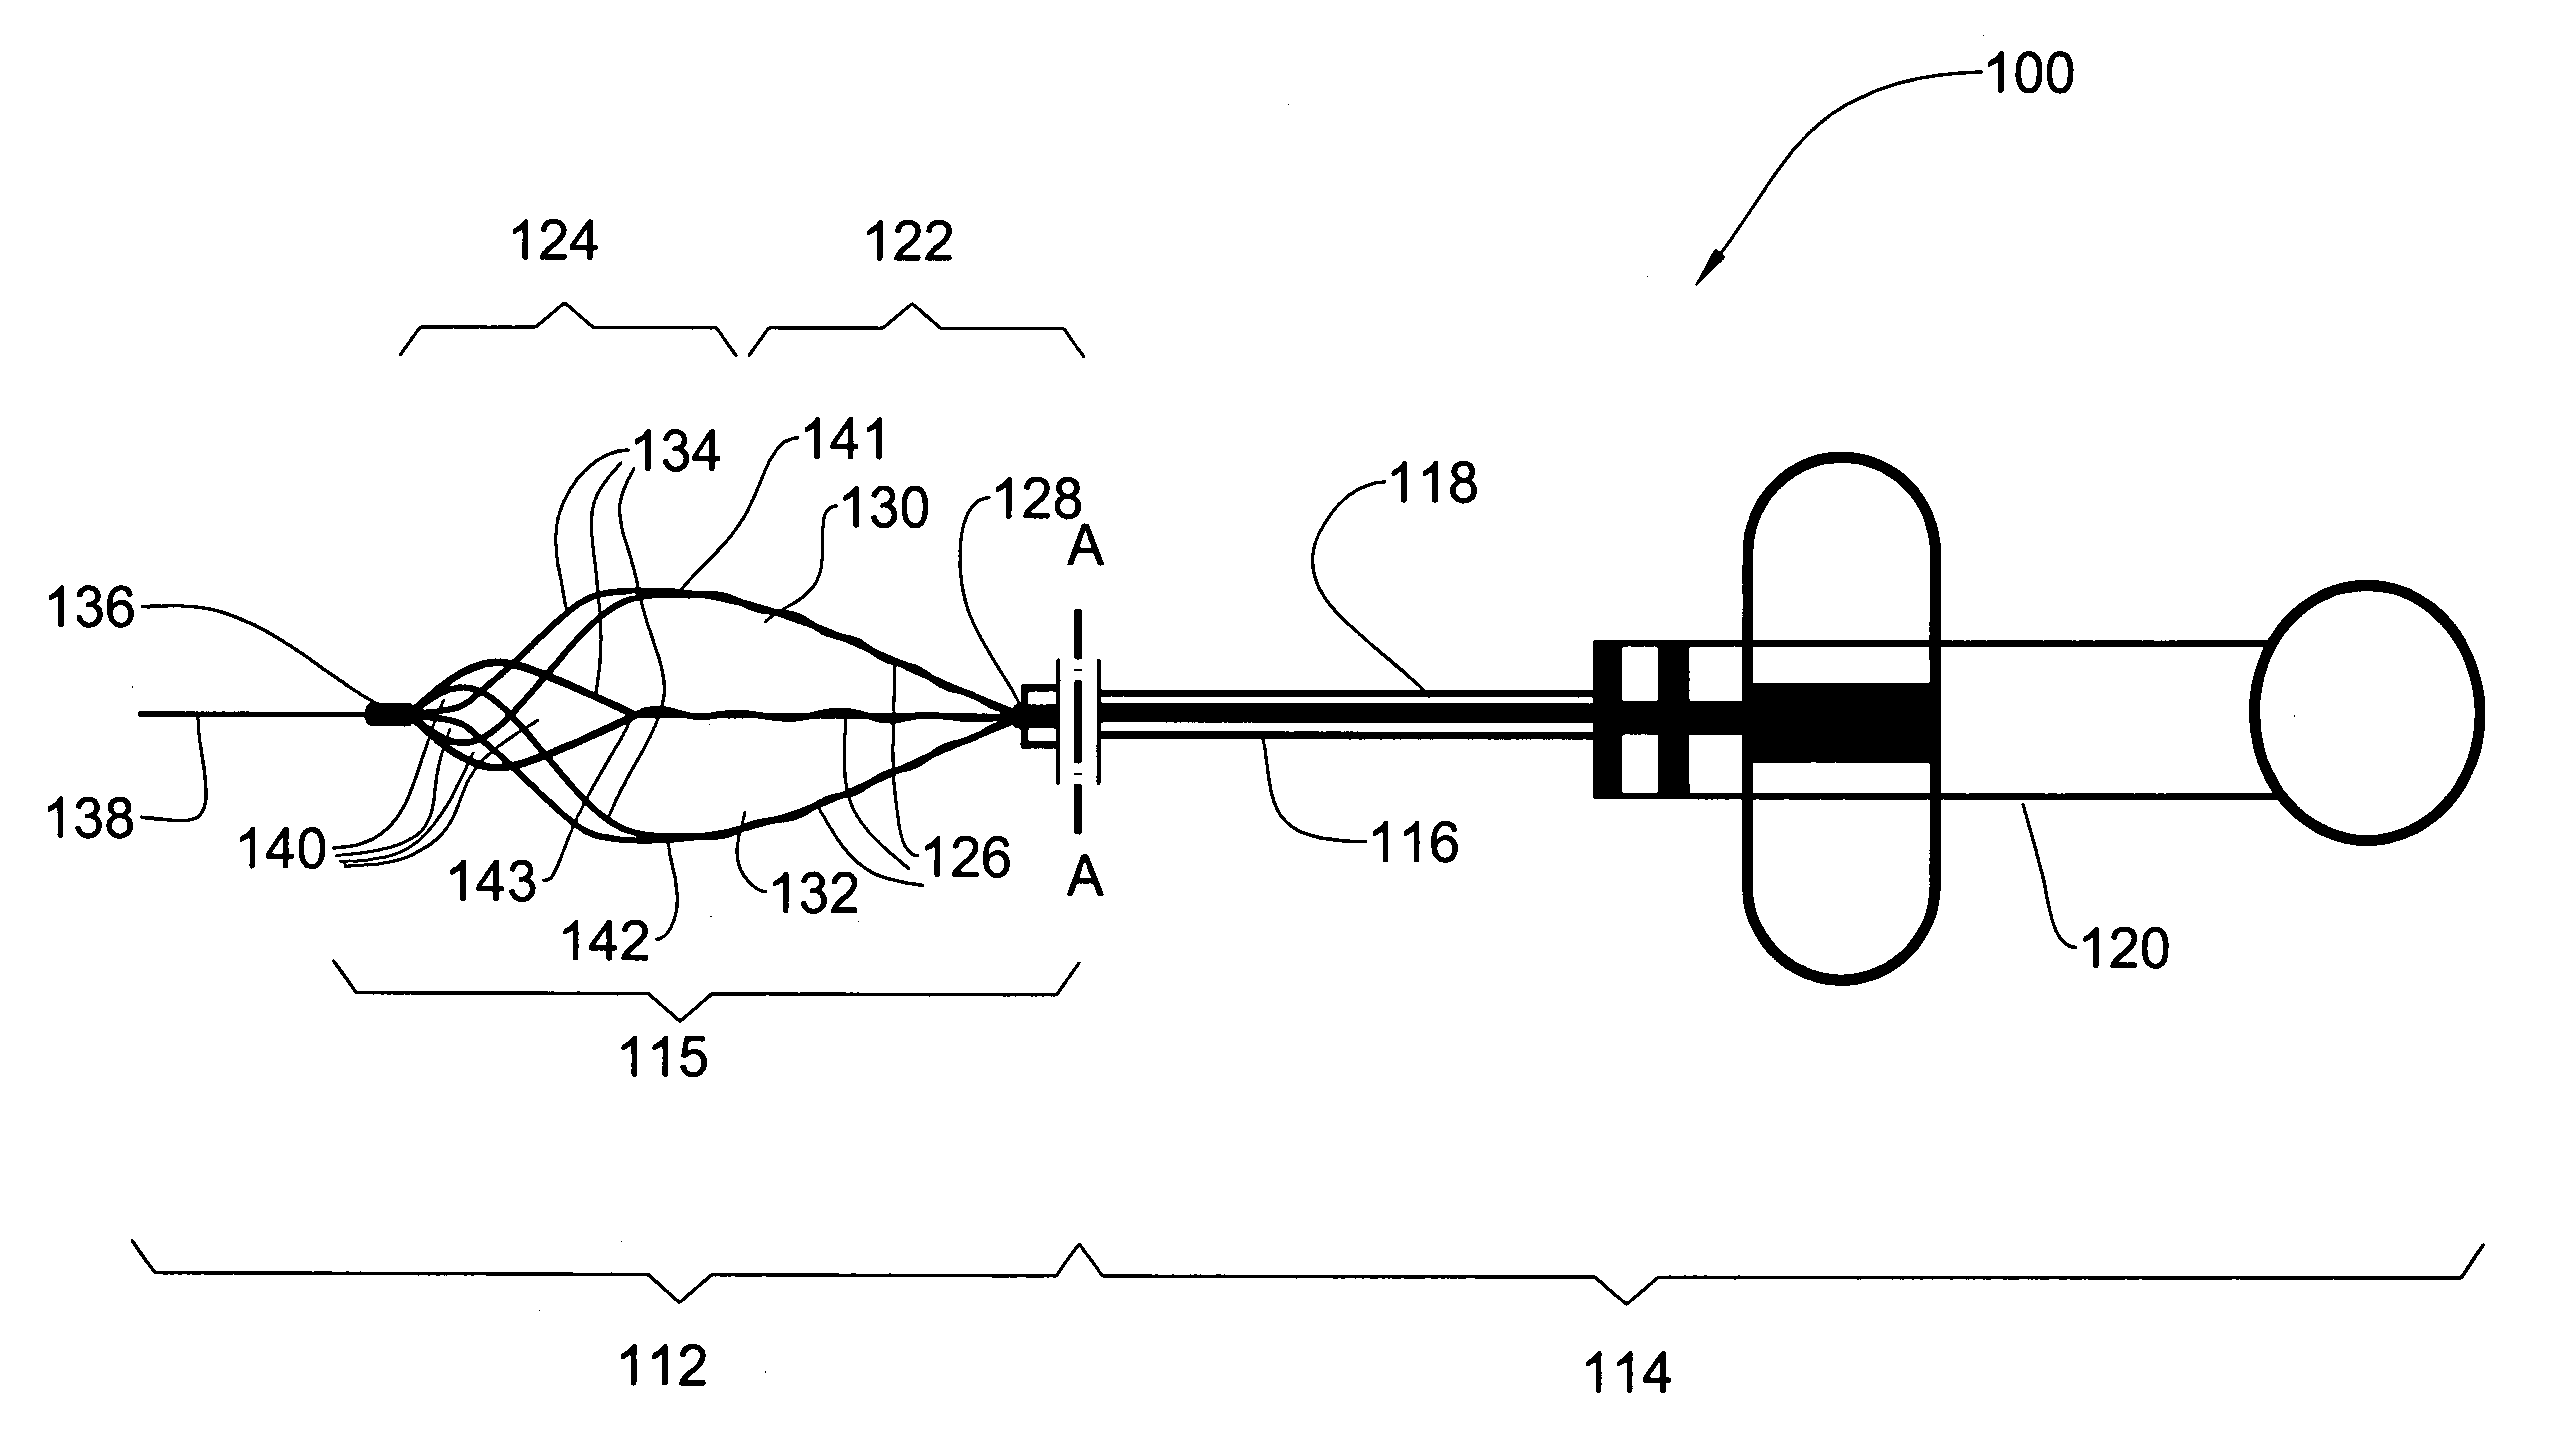 Surgical device for retrieval of foreign objects from a body